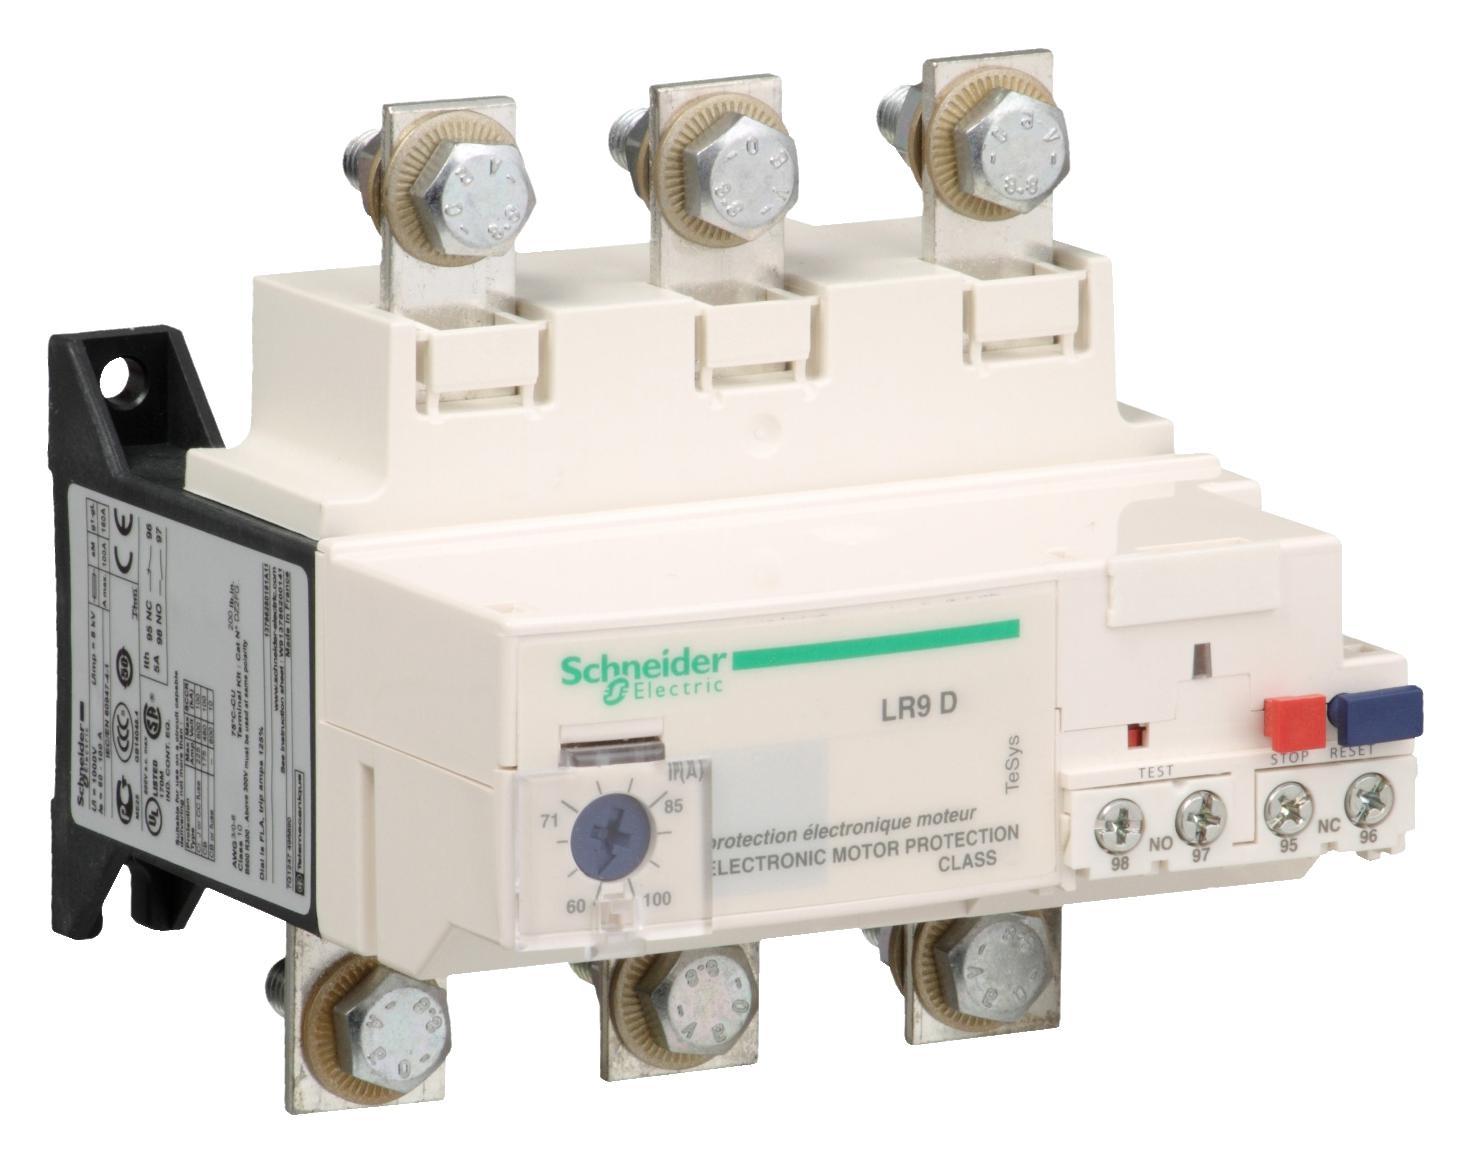 LR9D5367 THERMAL OVERLOAD, 60A-100A SCHNEIDER ELECTRIC